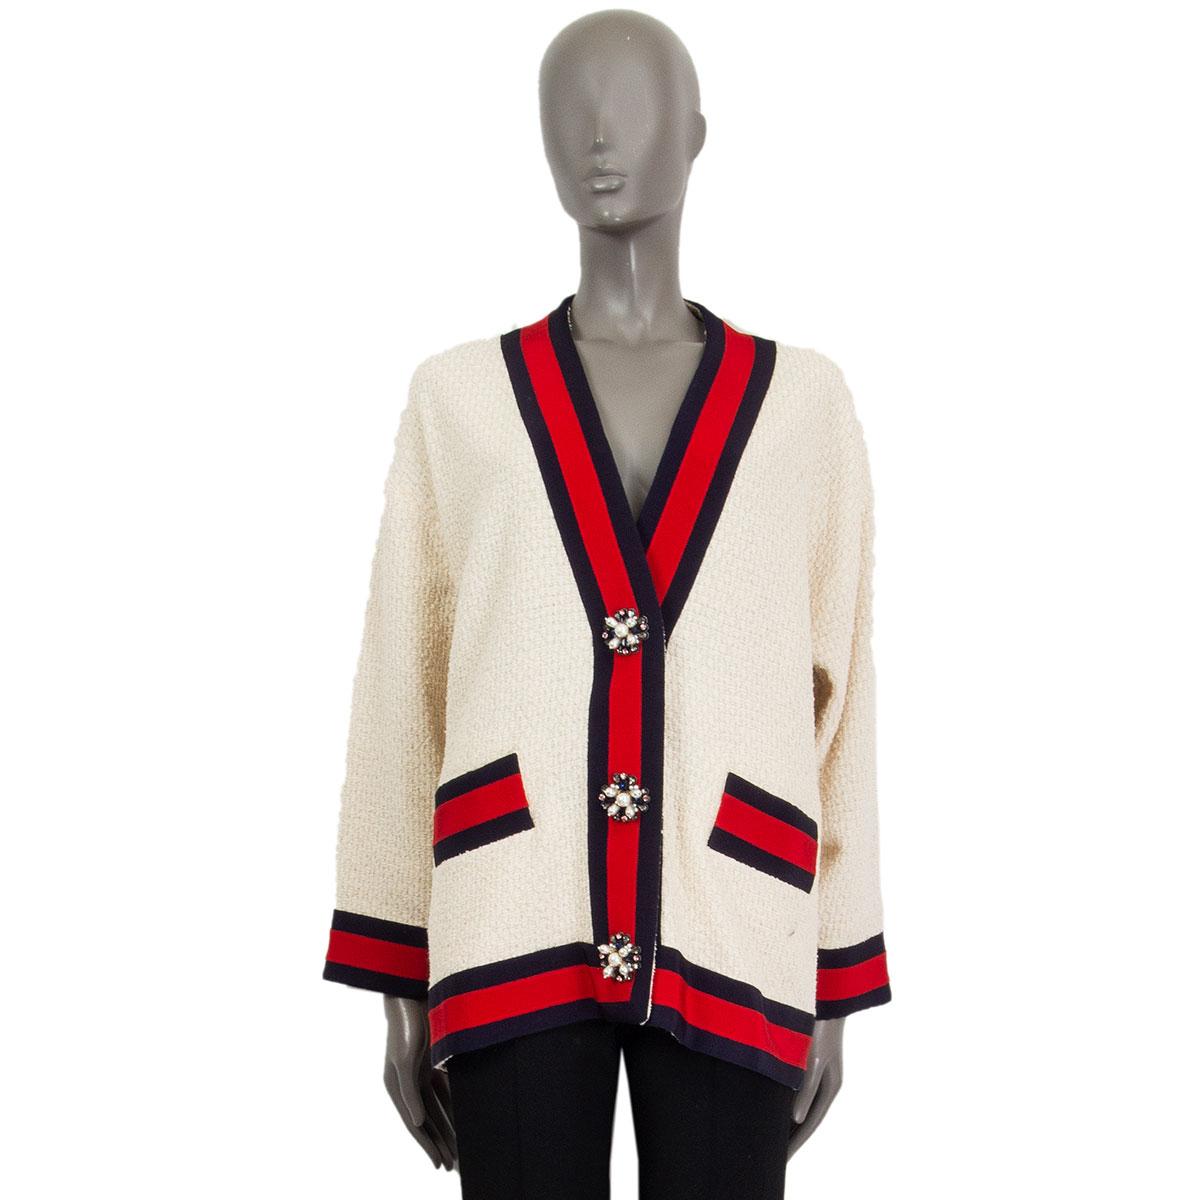 100% authentic Gucci boucle cardigan in ivory, red and navy cotton (88%) polyamide (12%). With   an oversized fit, V-neckline, ribbon hem and two pockets. Unlined. Closes with embellished faux-pearls and crystals buttons in the front. Has been worn